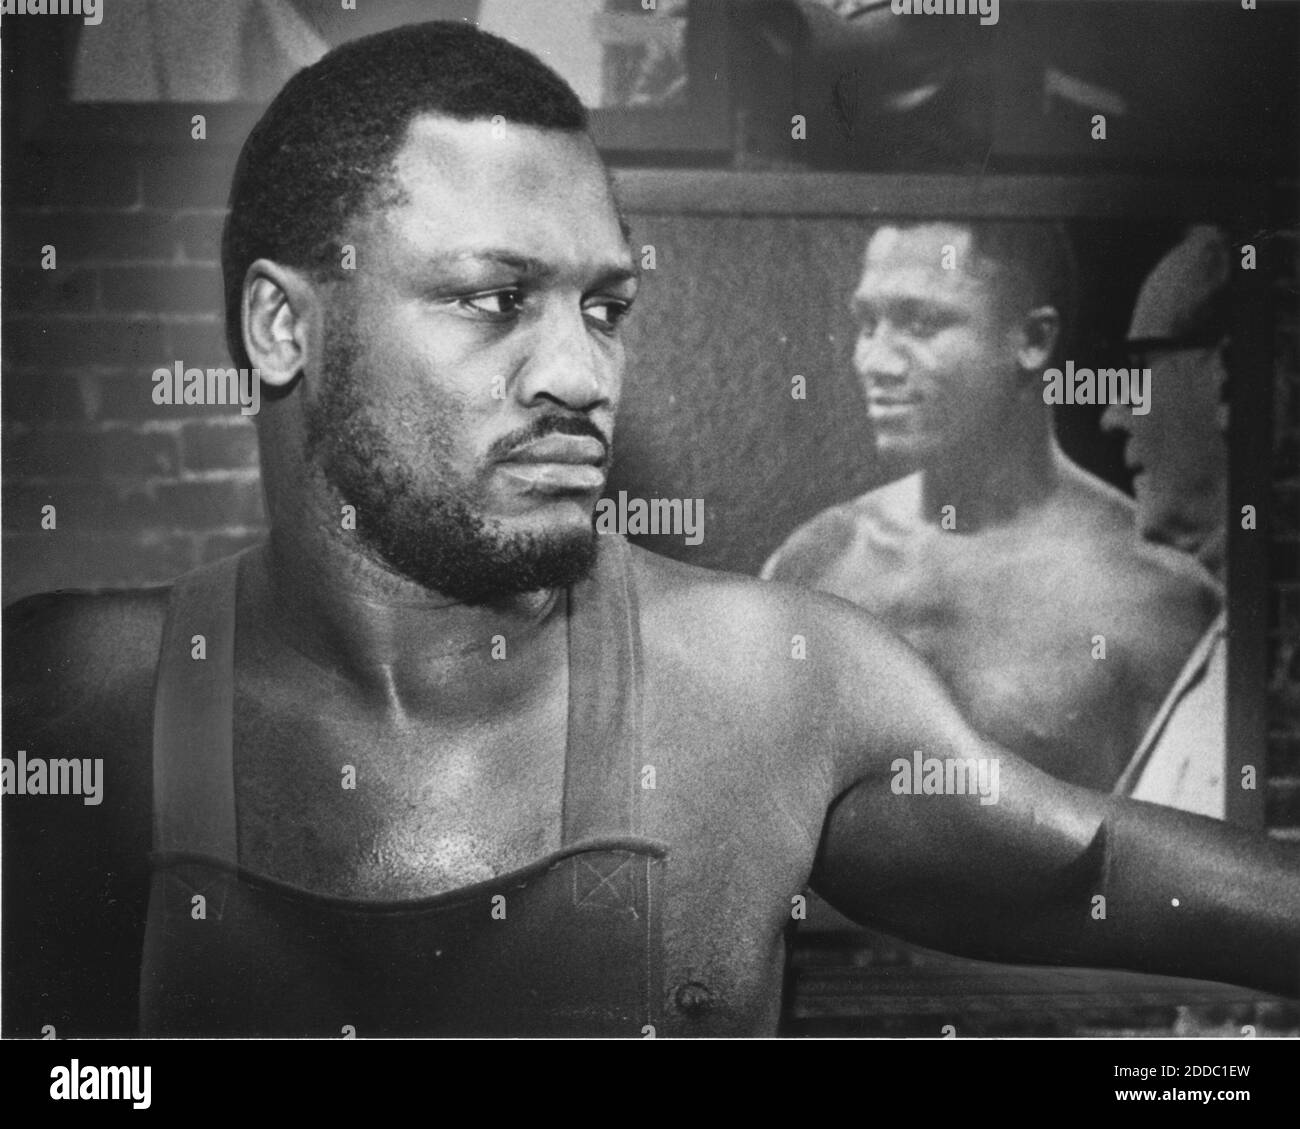 NO FILM, NO VIDEO, NO TV, NO DOCUMENTARY - Pictured in this 1981 file photo, Joe Frazier, the former heavyweight champion, has died. He was 67. Photo by Philadelphia Daily News/MCT/ABACAPRESS.COM Stock Photo